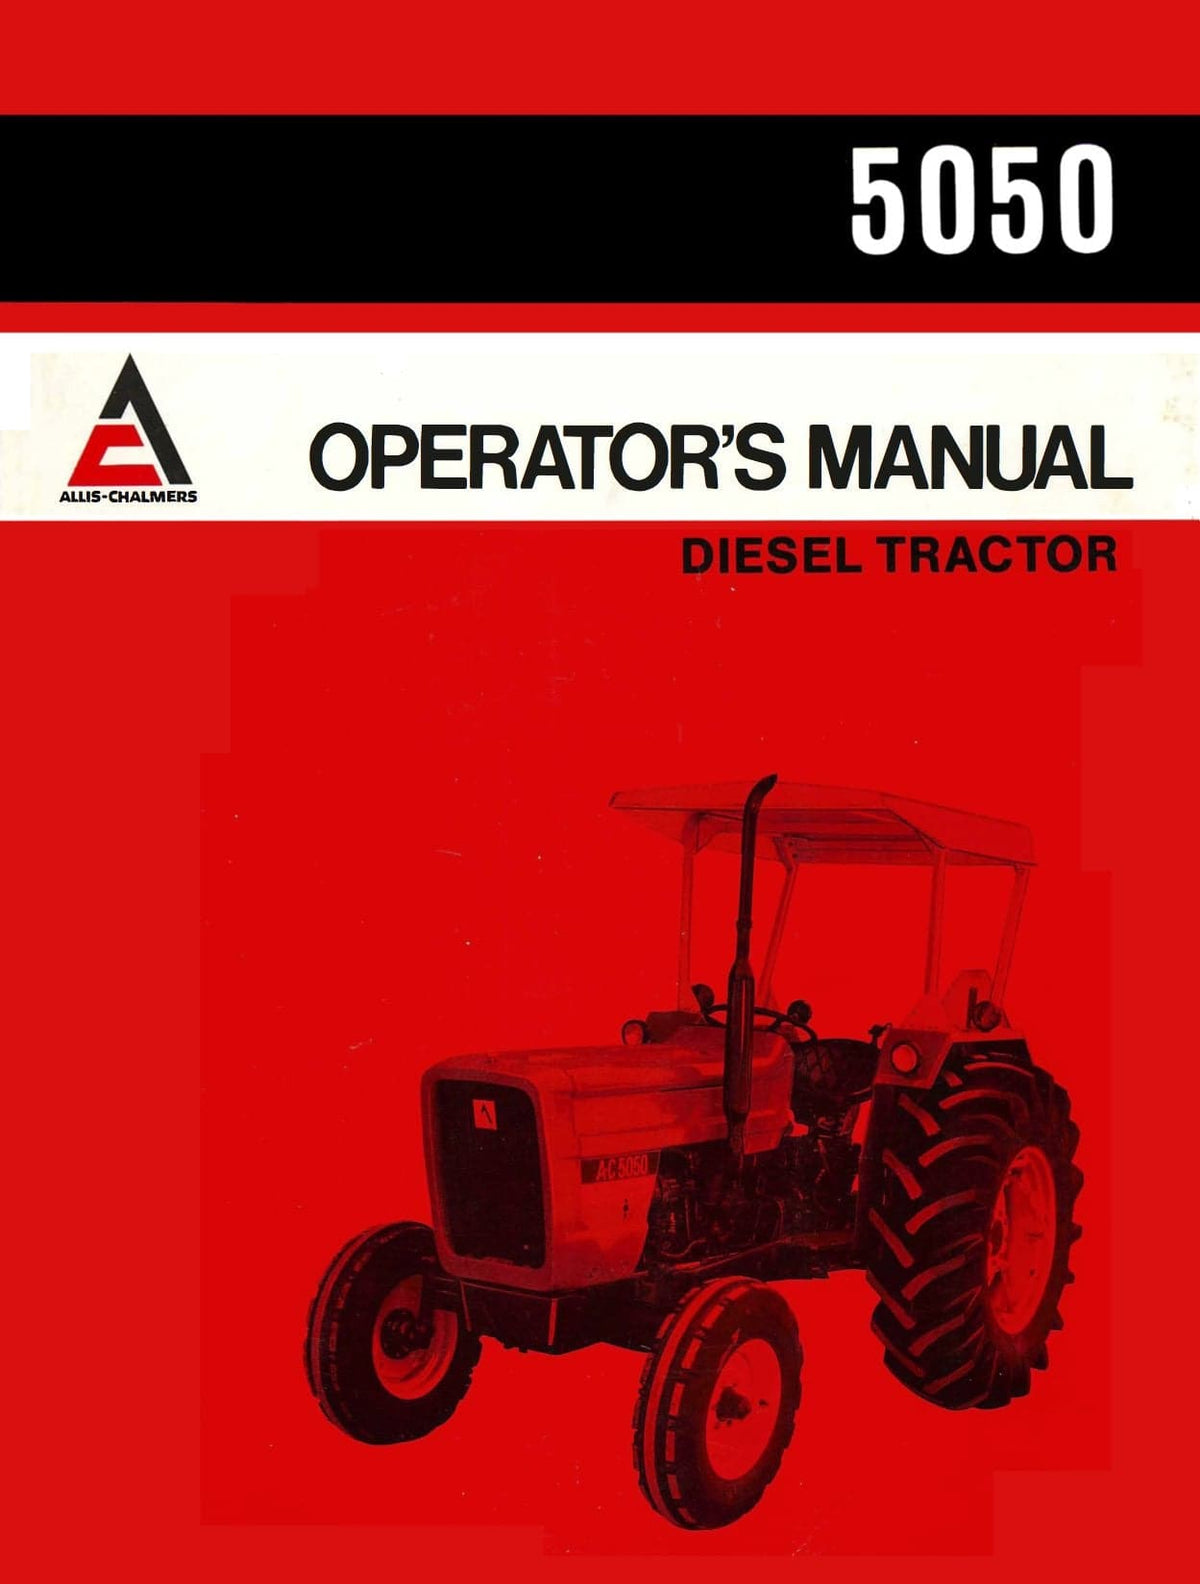 Allis-Chalmers 5050 Diesel Tractor - Operator's Manual - Ag Manuals - A Provider of Digital Farm Manuals - 1